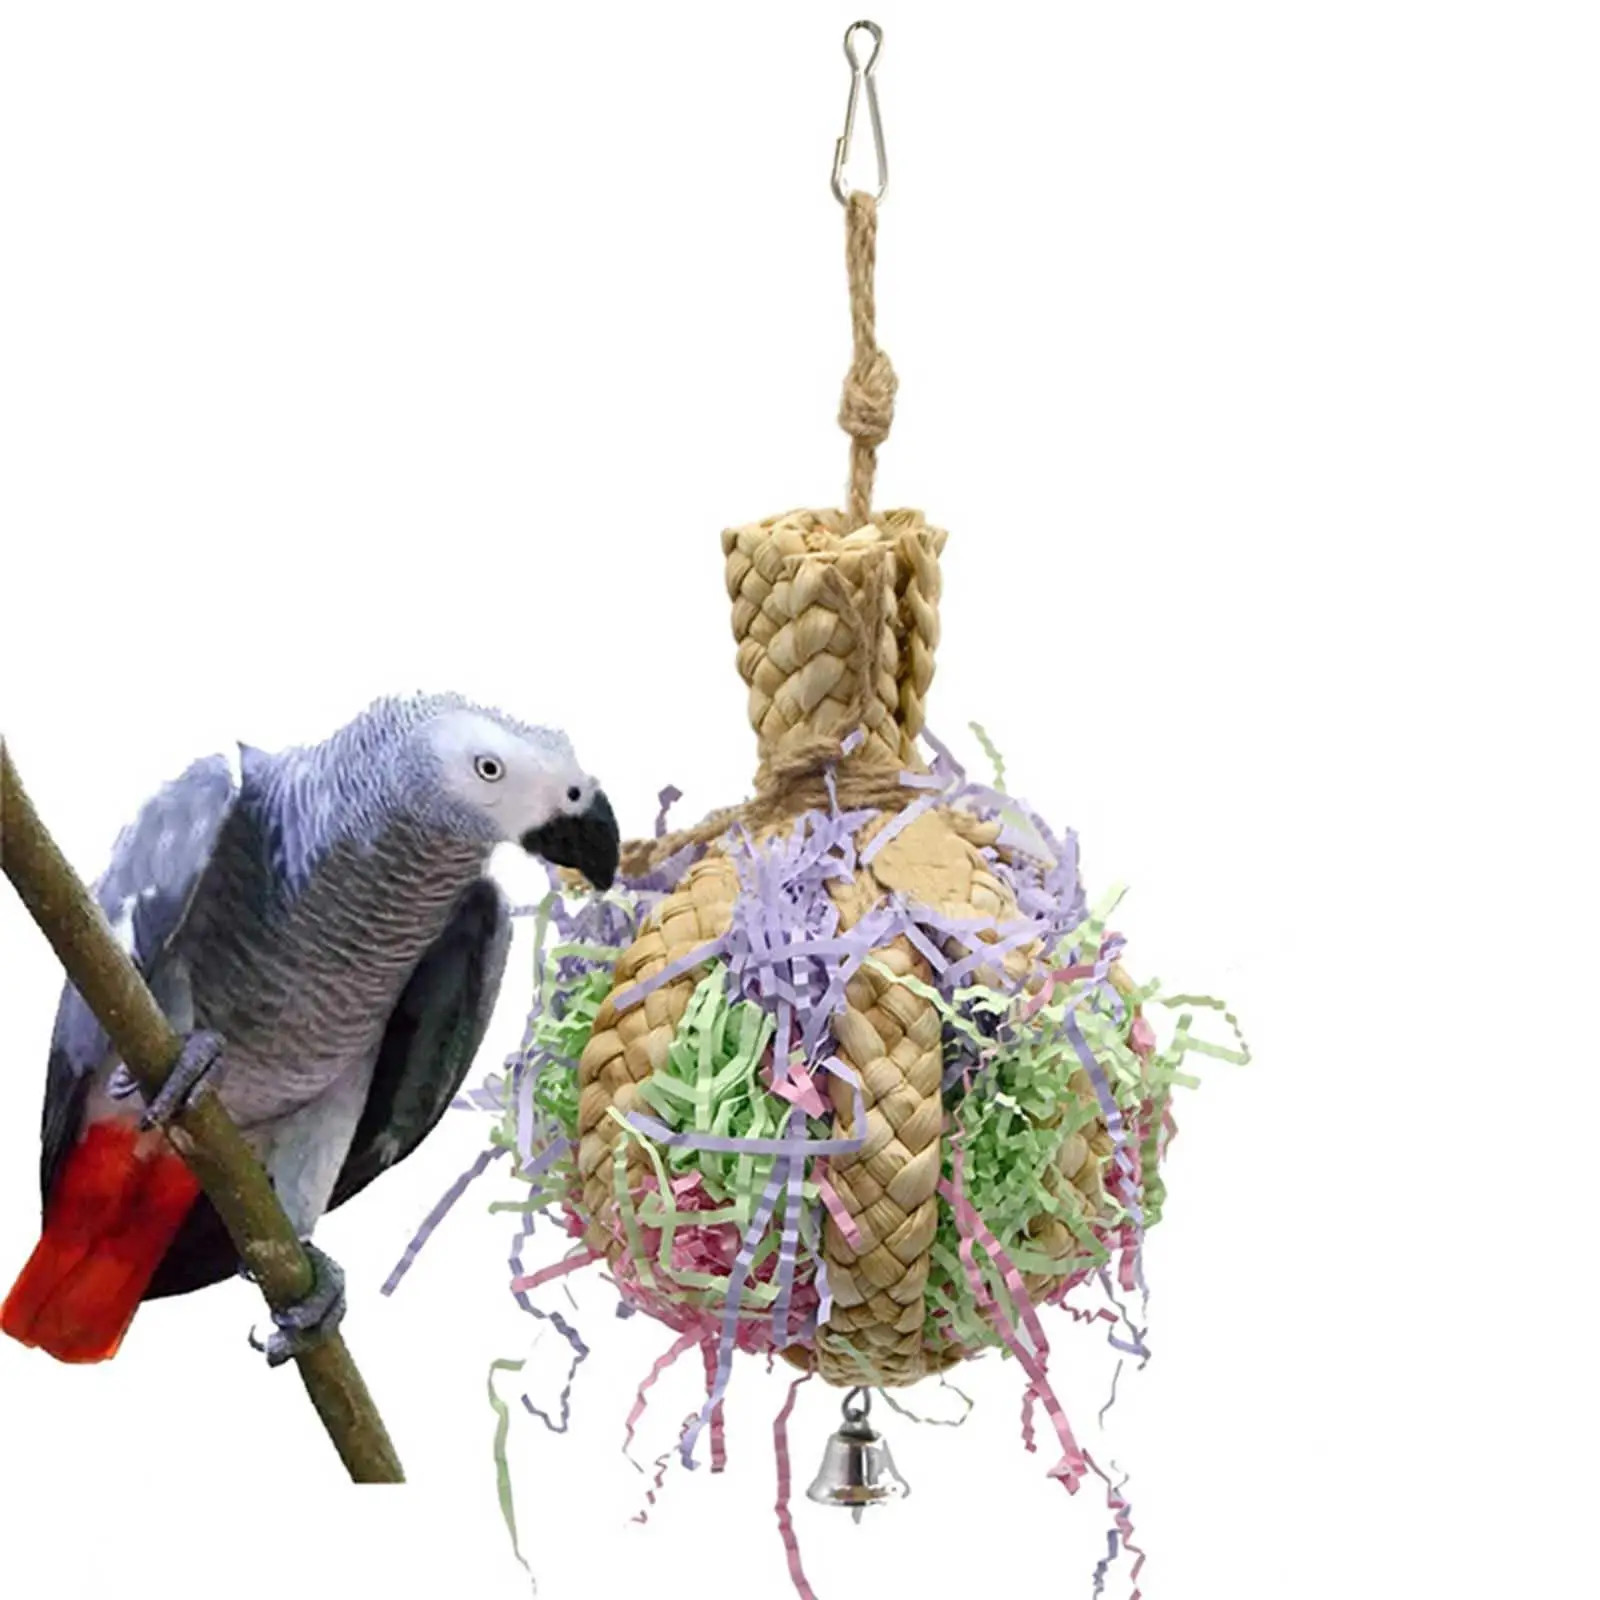 Bird Toys, Parrot Toys with Bells, Parrots Cage Chewing Toy, Multicolored Bite Toys for Macaw Cockatoo Pet Birds Accessories